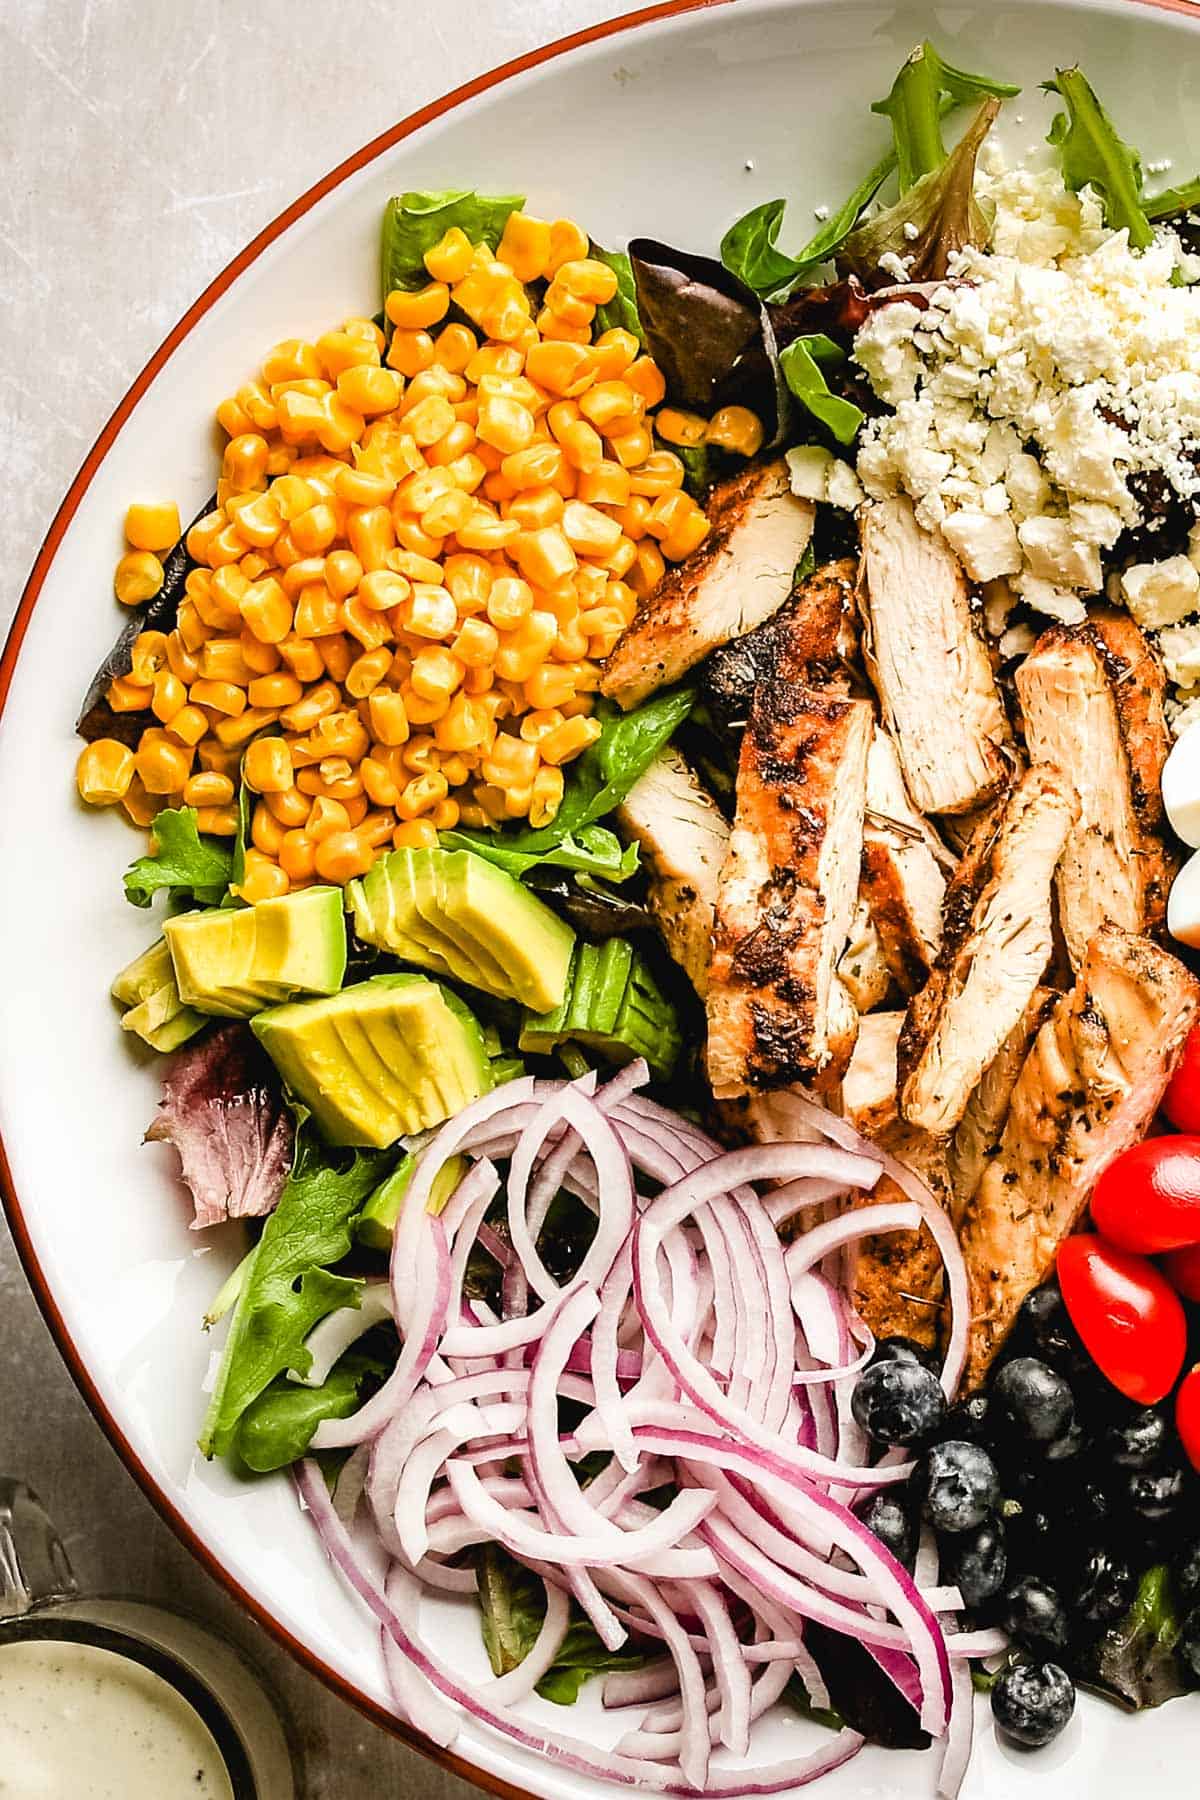 upclose shot of a Cobb salad with corn, red onions, chicken, tomatoes, feta cheese, blueberries and mixed greens